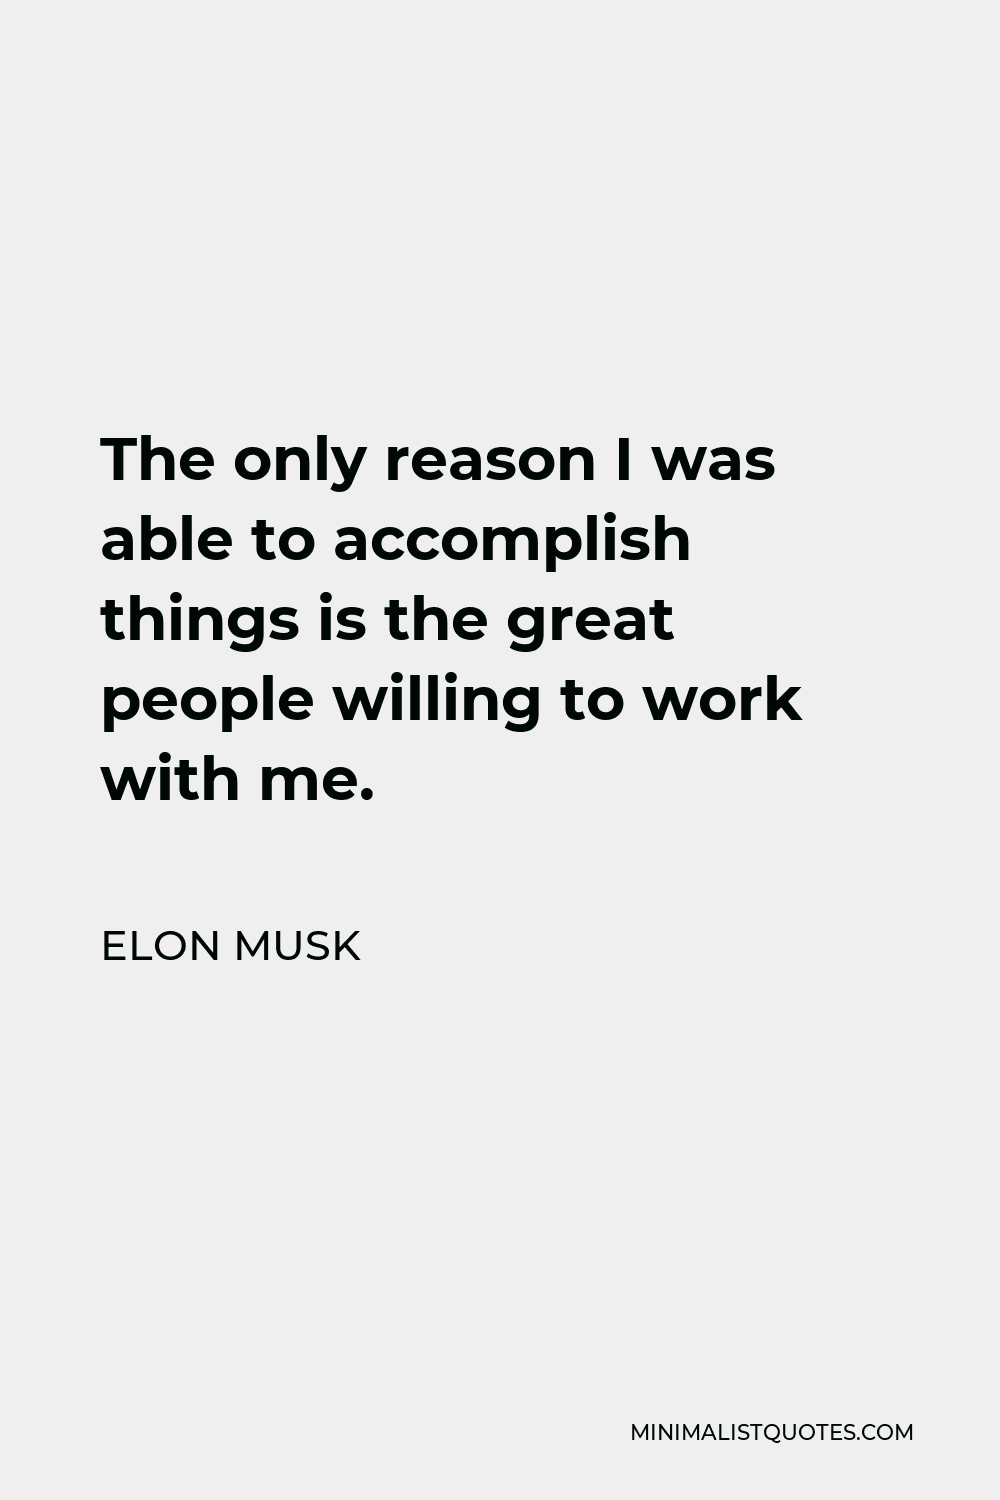 Elon Musk Quote - The only reason I was able to accomplish things is the great people willing to work with me.